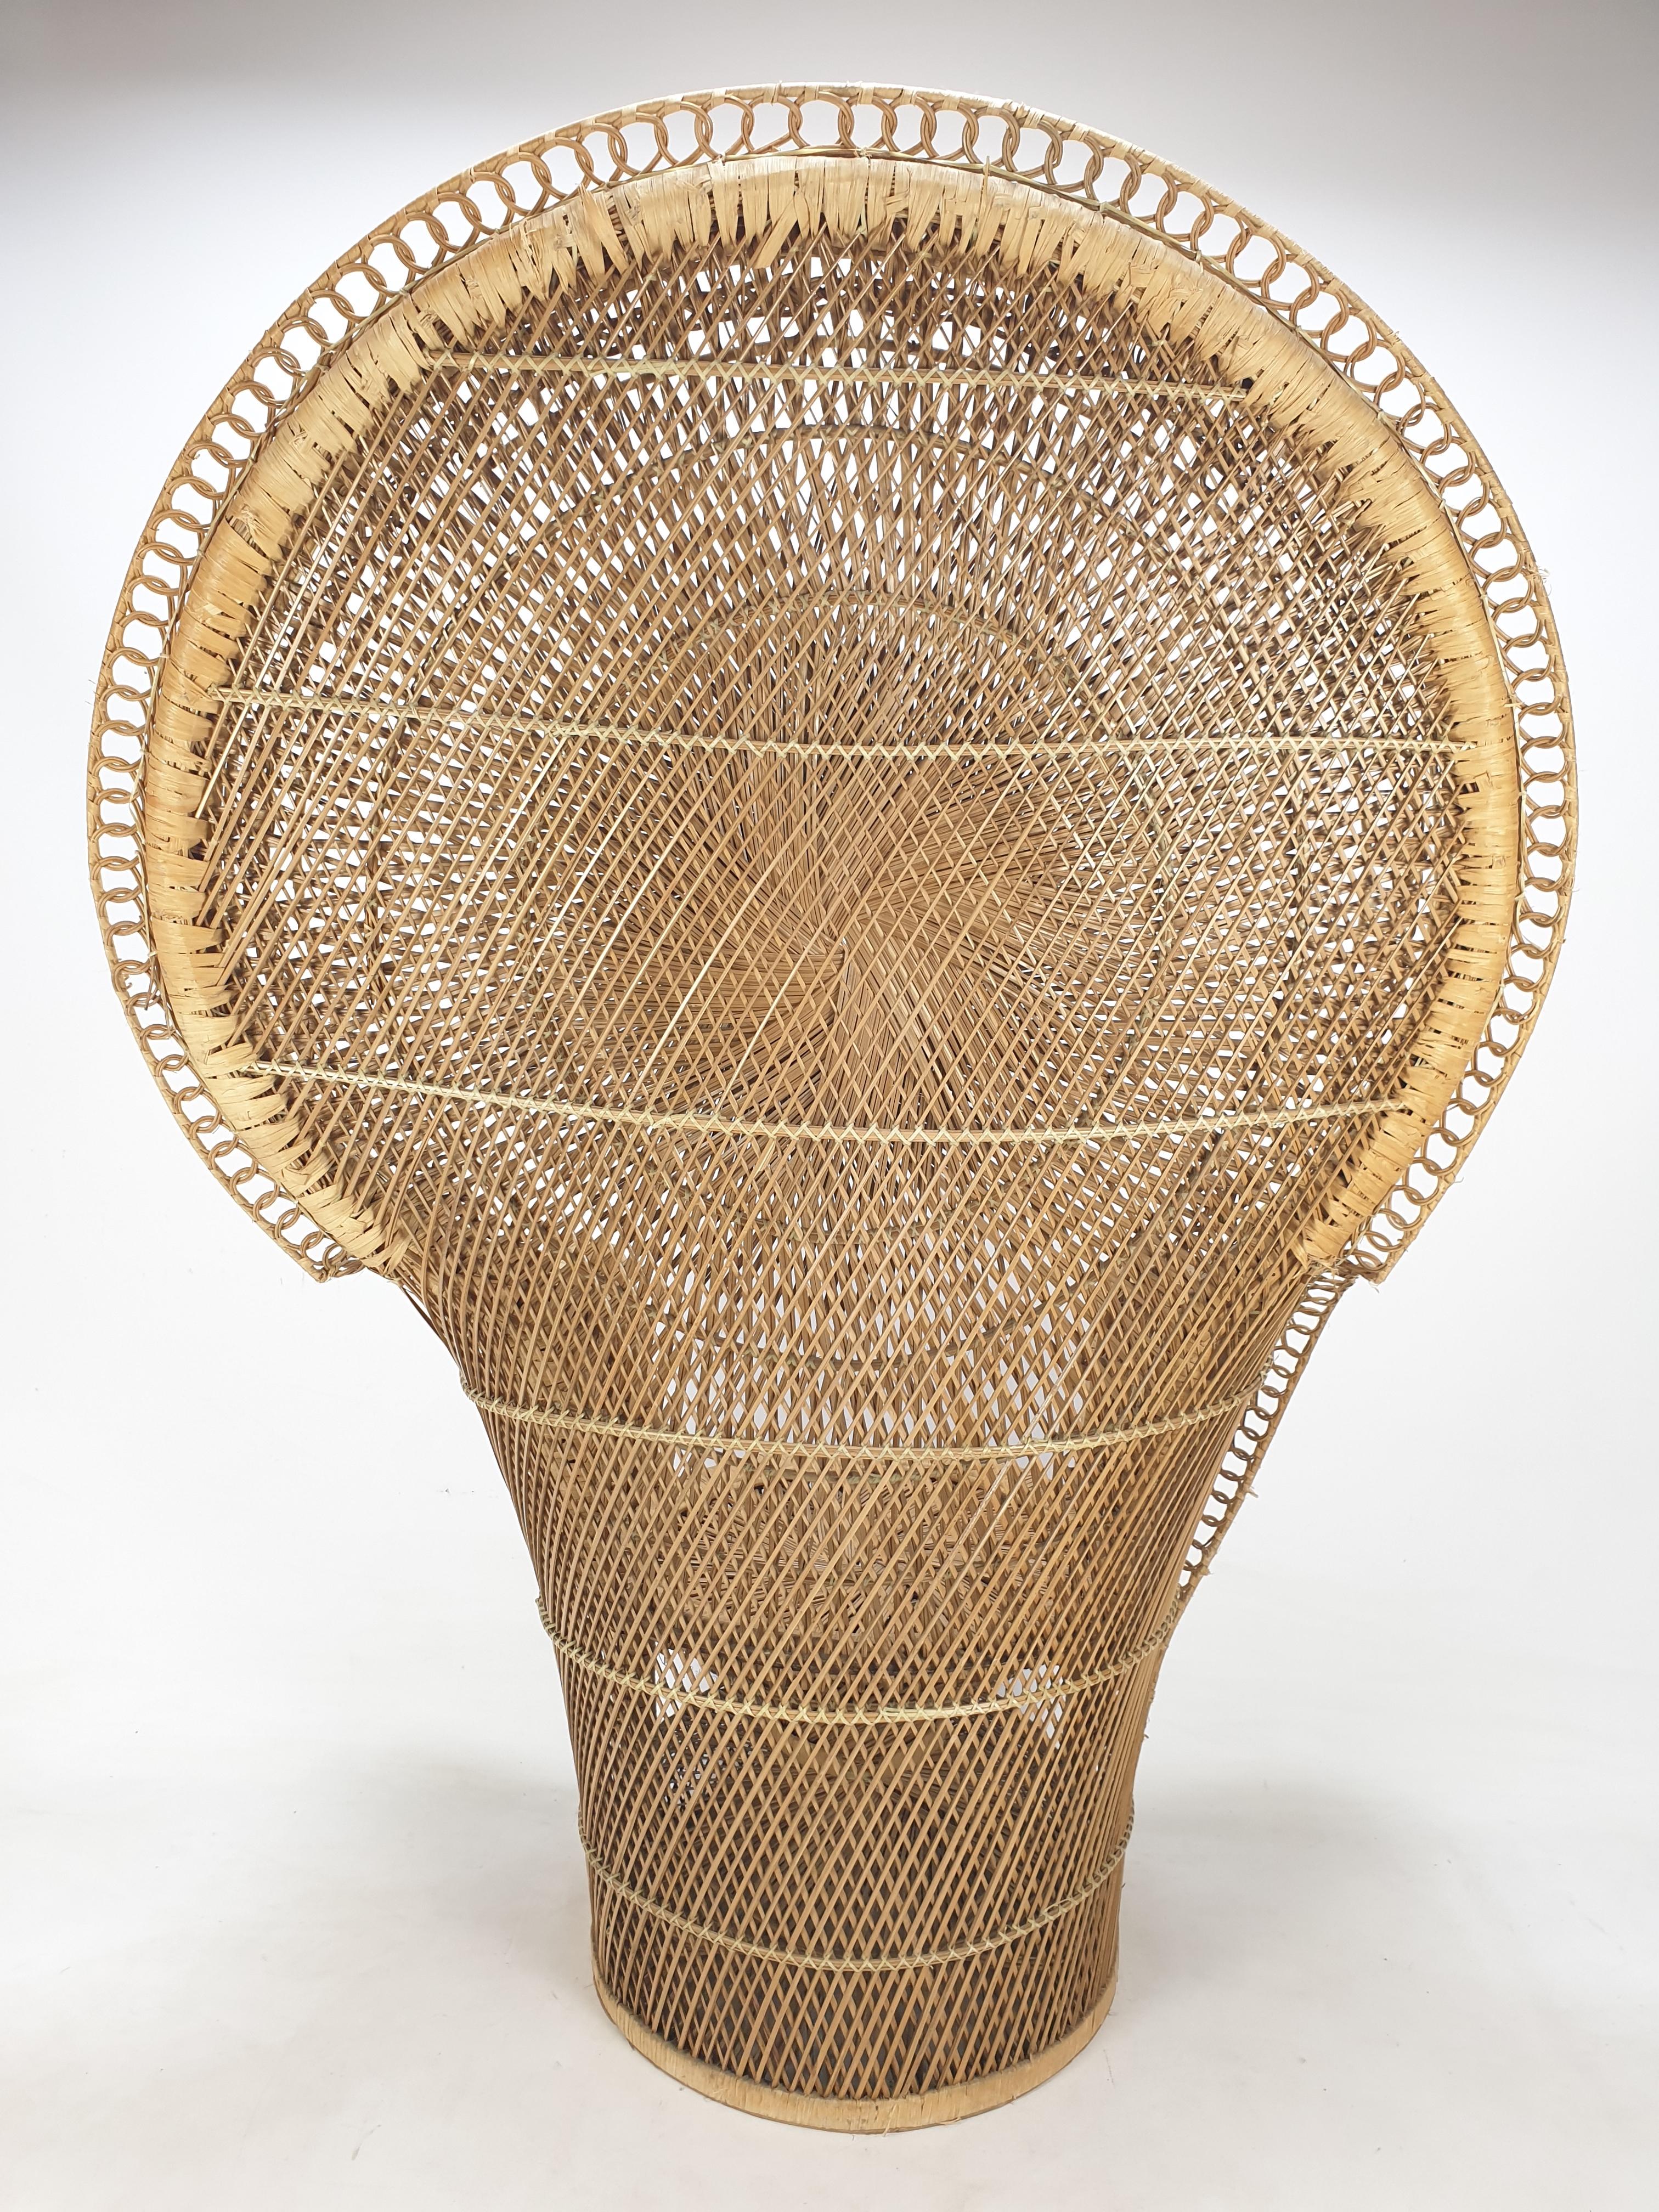 Midcentury Emmanuelle or Peacock Rattan and Wicker Chair, Italy 1960s For Sale 2